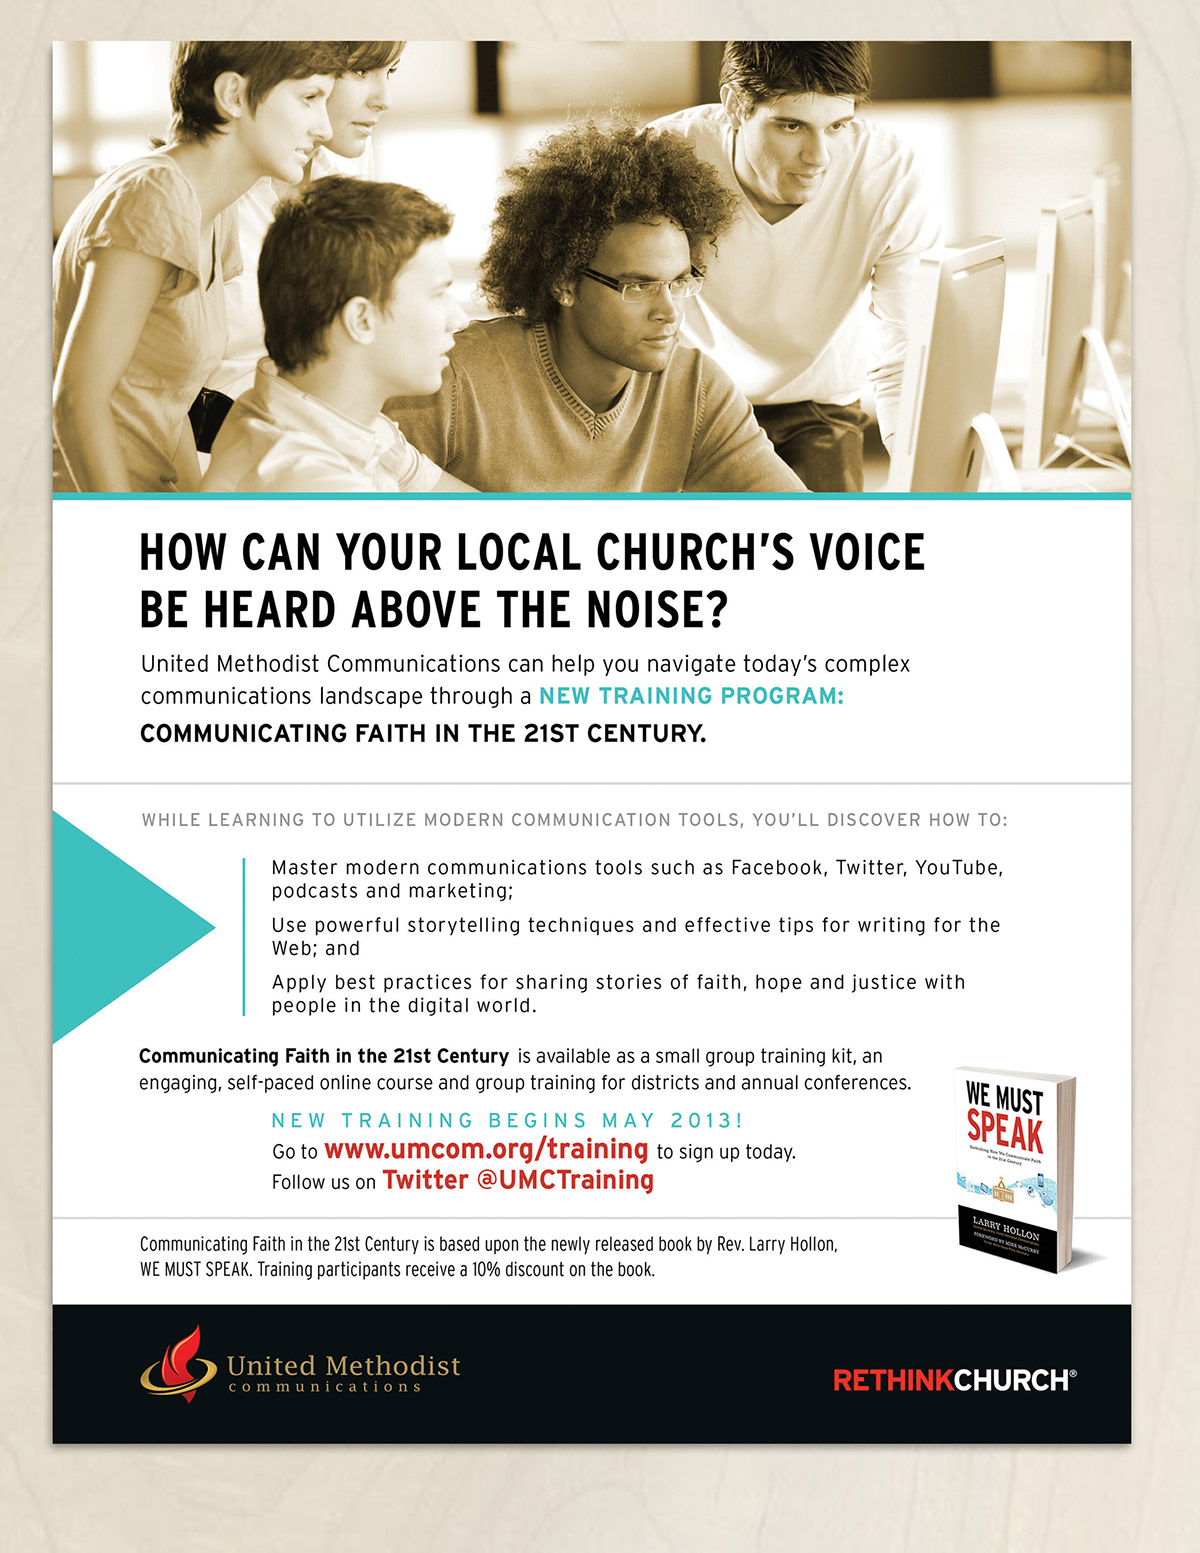 print ad poster flyer CAMPAIGN COLLATERAL social awareness Faith Based Community Outreach religion community service